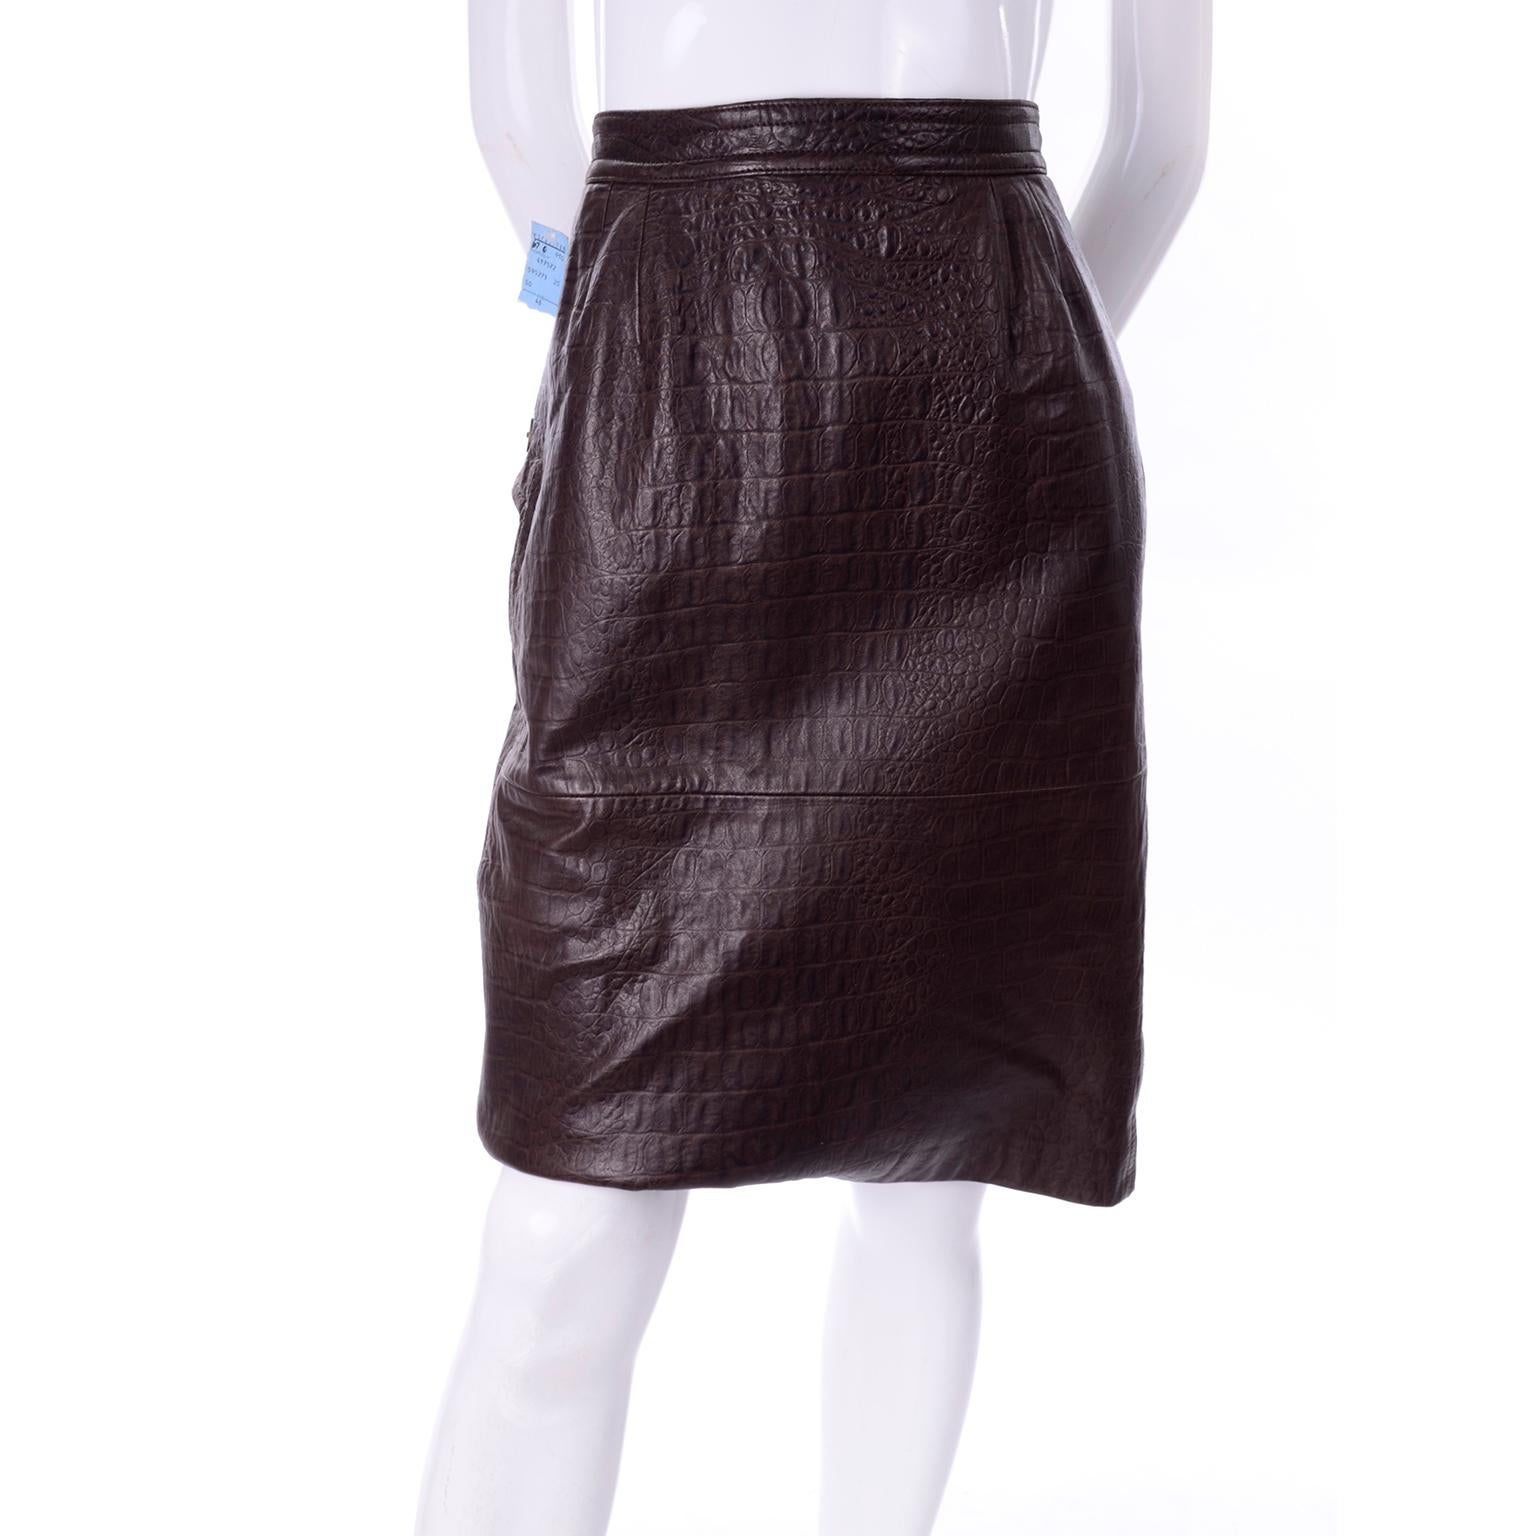 This is a gorgeous brown leather pencil skirt by Valentino with an alligator print embossing. It buttons and zips in the back, with two side flap pockets that button closed with two large buttons. It has a small kick flap in back and is fully lined